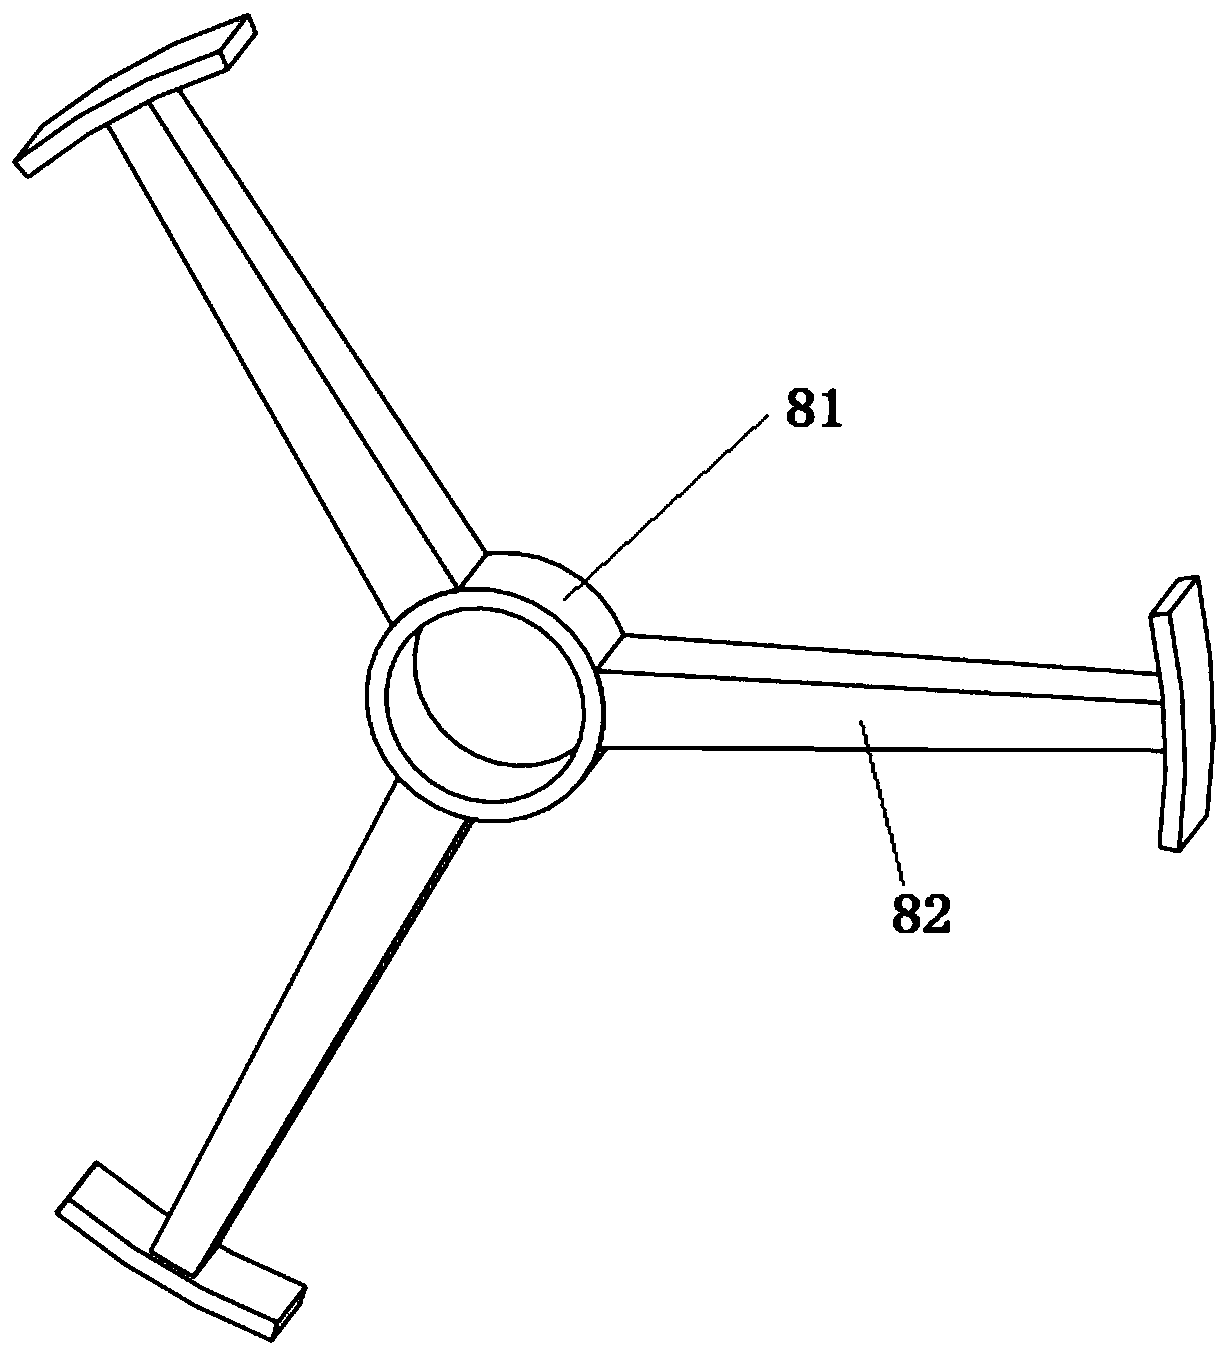 A knee joint passive reconfigurable compliant constant force assisting device